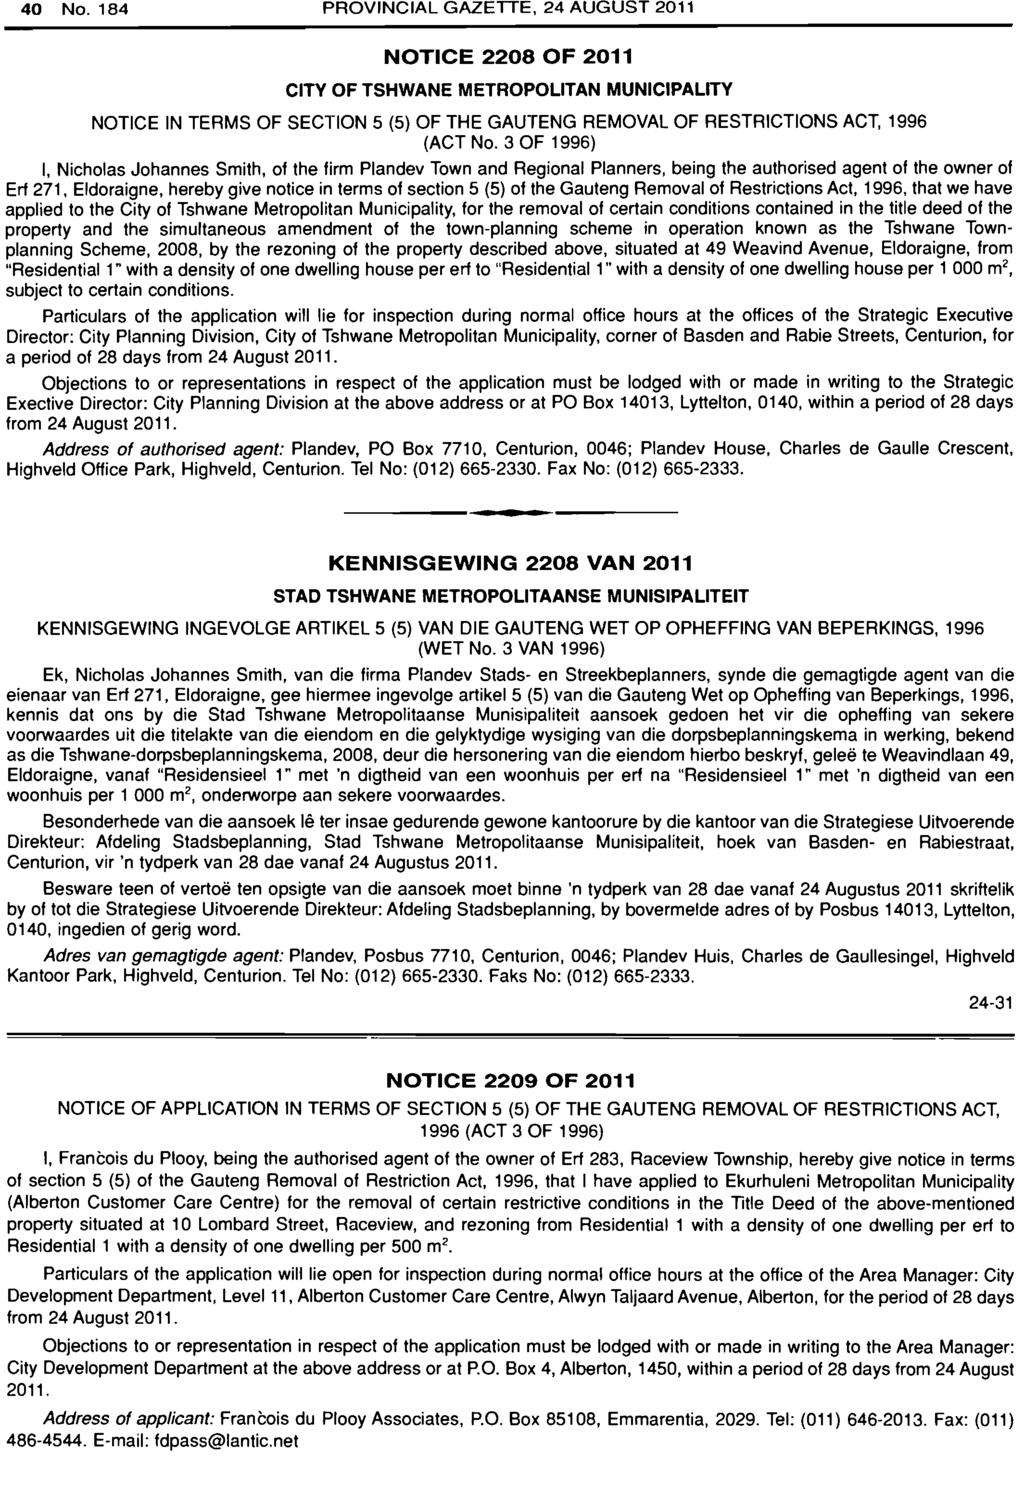 40 No. 184 PROVINCIAL GAZETTE, 24 AUGUST 2011 NOTICE 2208 OF 2011 CITY OF TSHWANE METROPOLITAN MUNICIPALITY NOTICE IN TERMS OF SECTION 5 (5) OF THE GAUTENG REMOVAL OF RESTRICTIONS ACT, 1996 (ACT No.